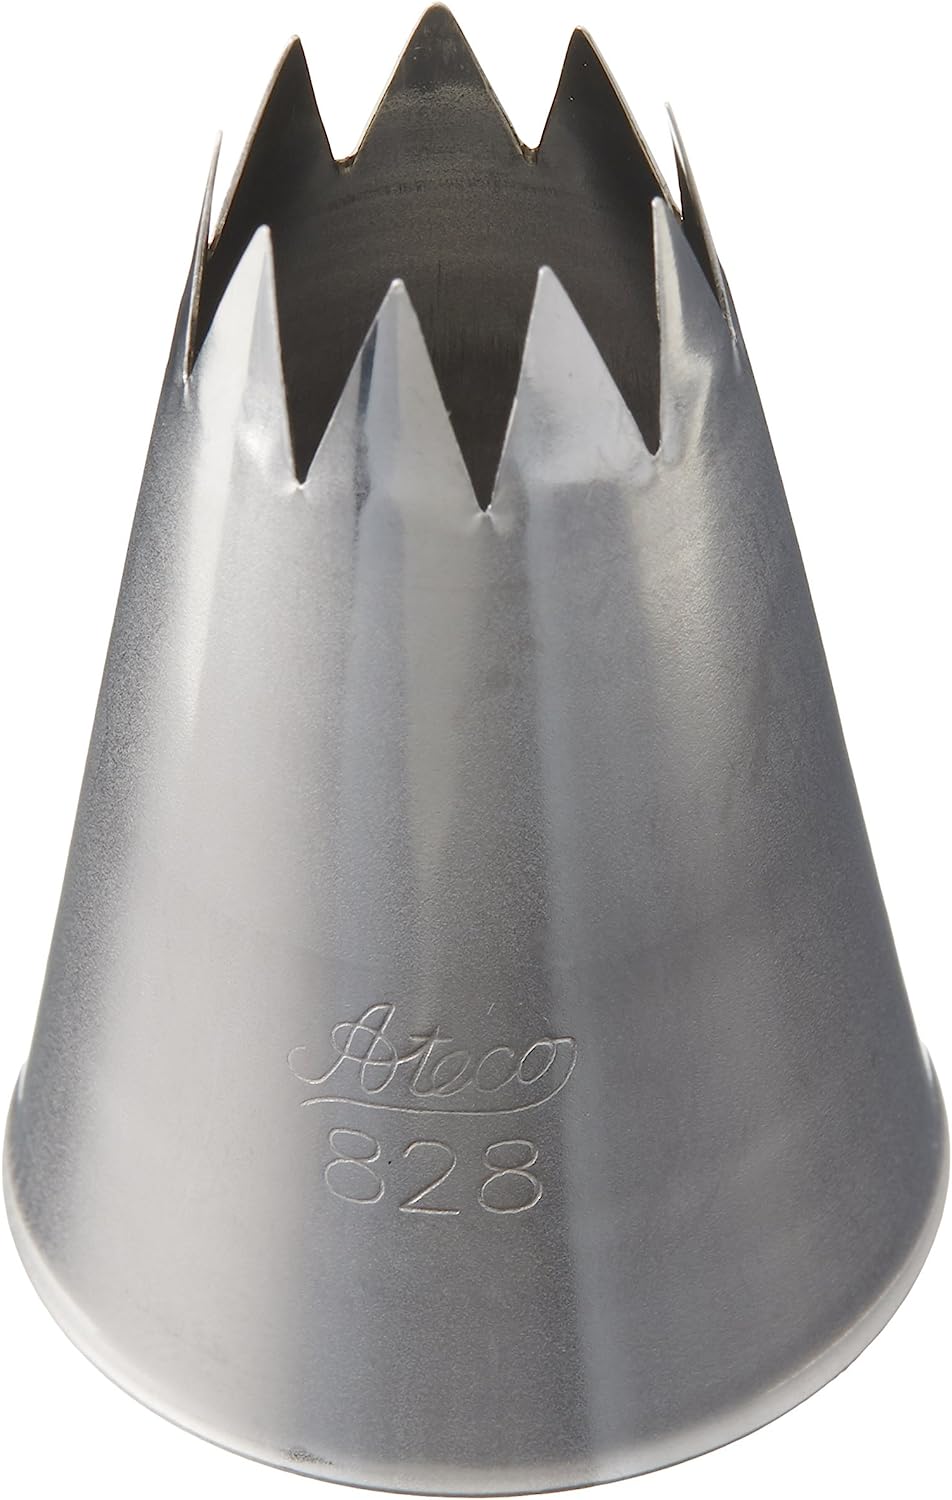 Ateco 828 SS Star Pastry Decorating Tip 5/8"